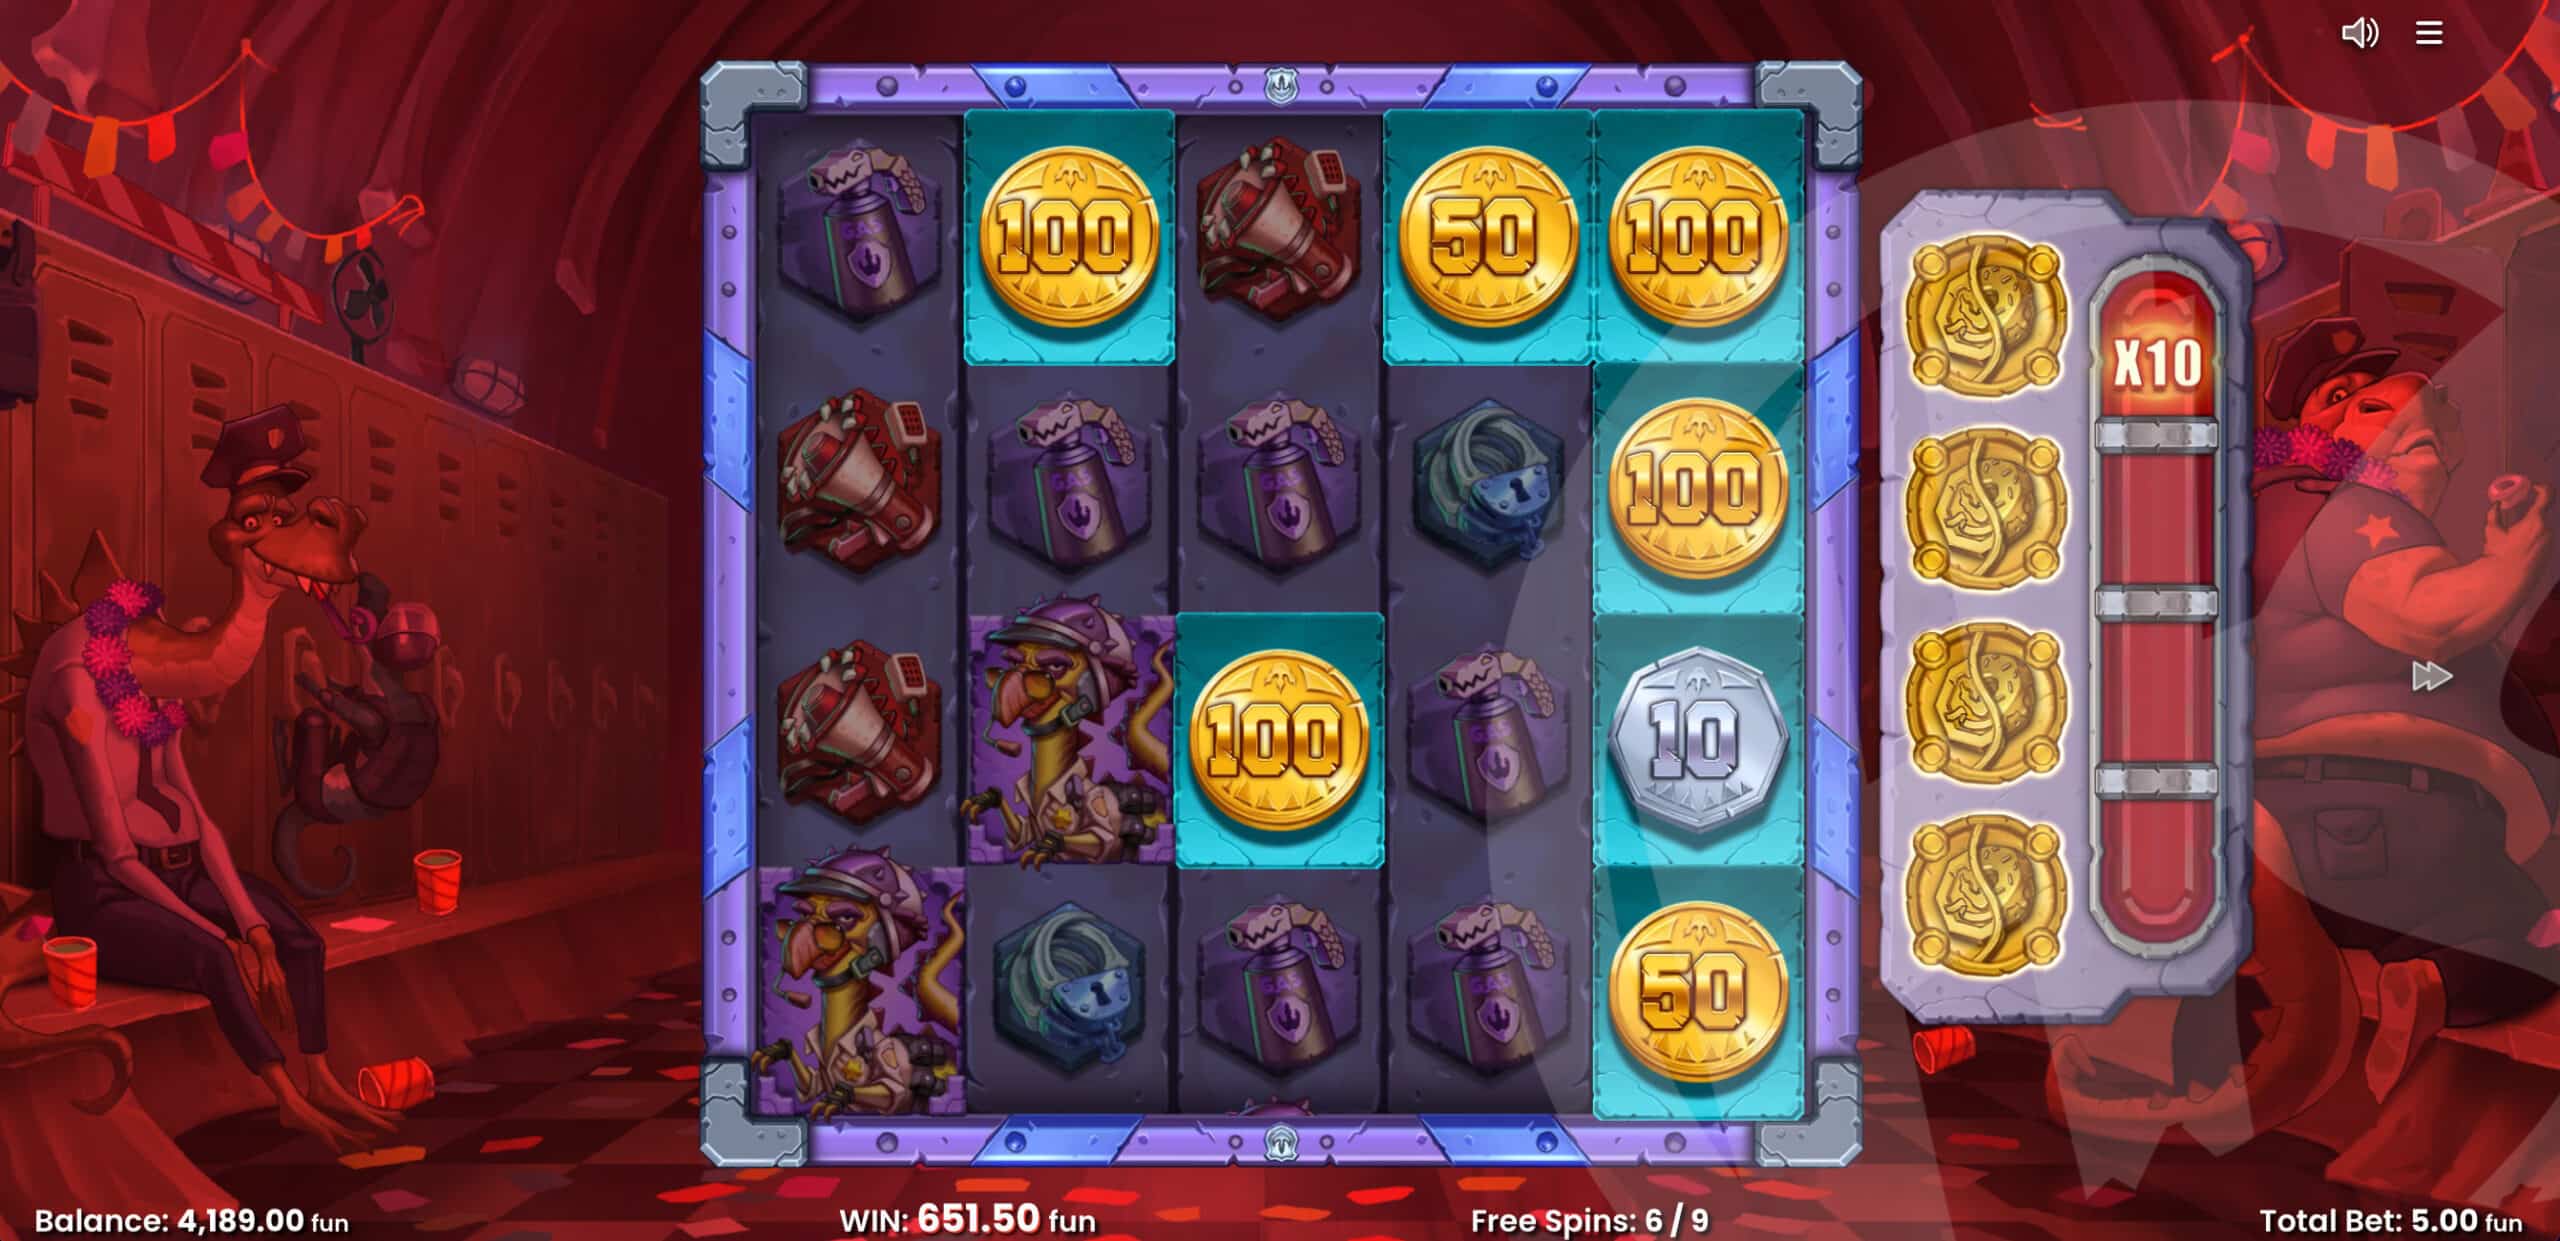 Dino Coin Values Will Be Multiplied During Free Spins By The Active Multiplier